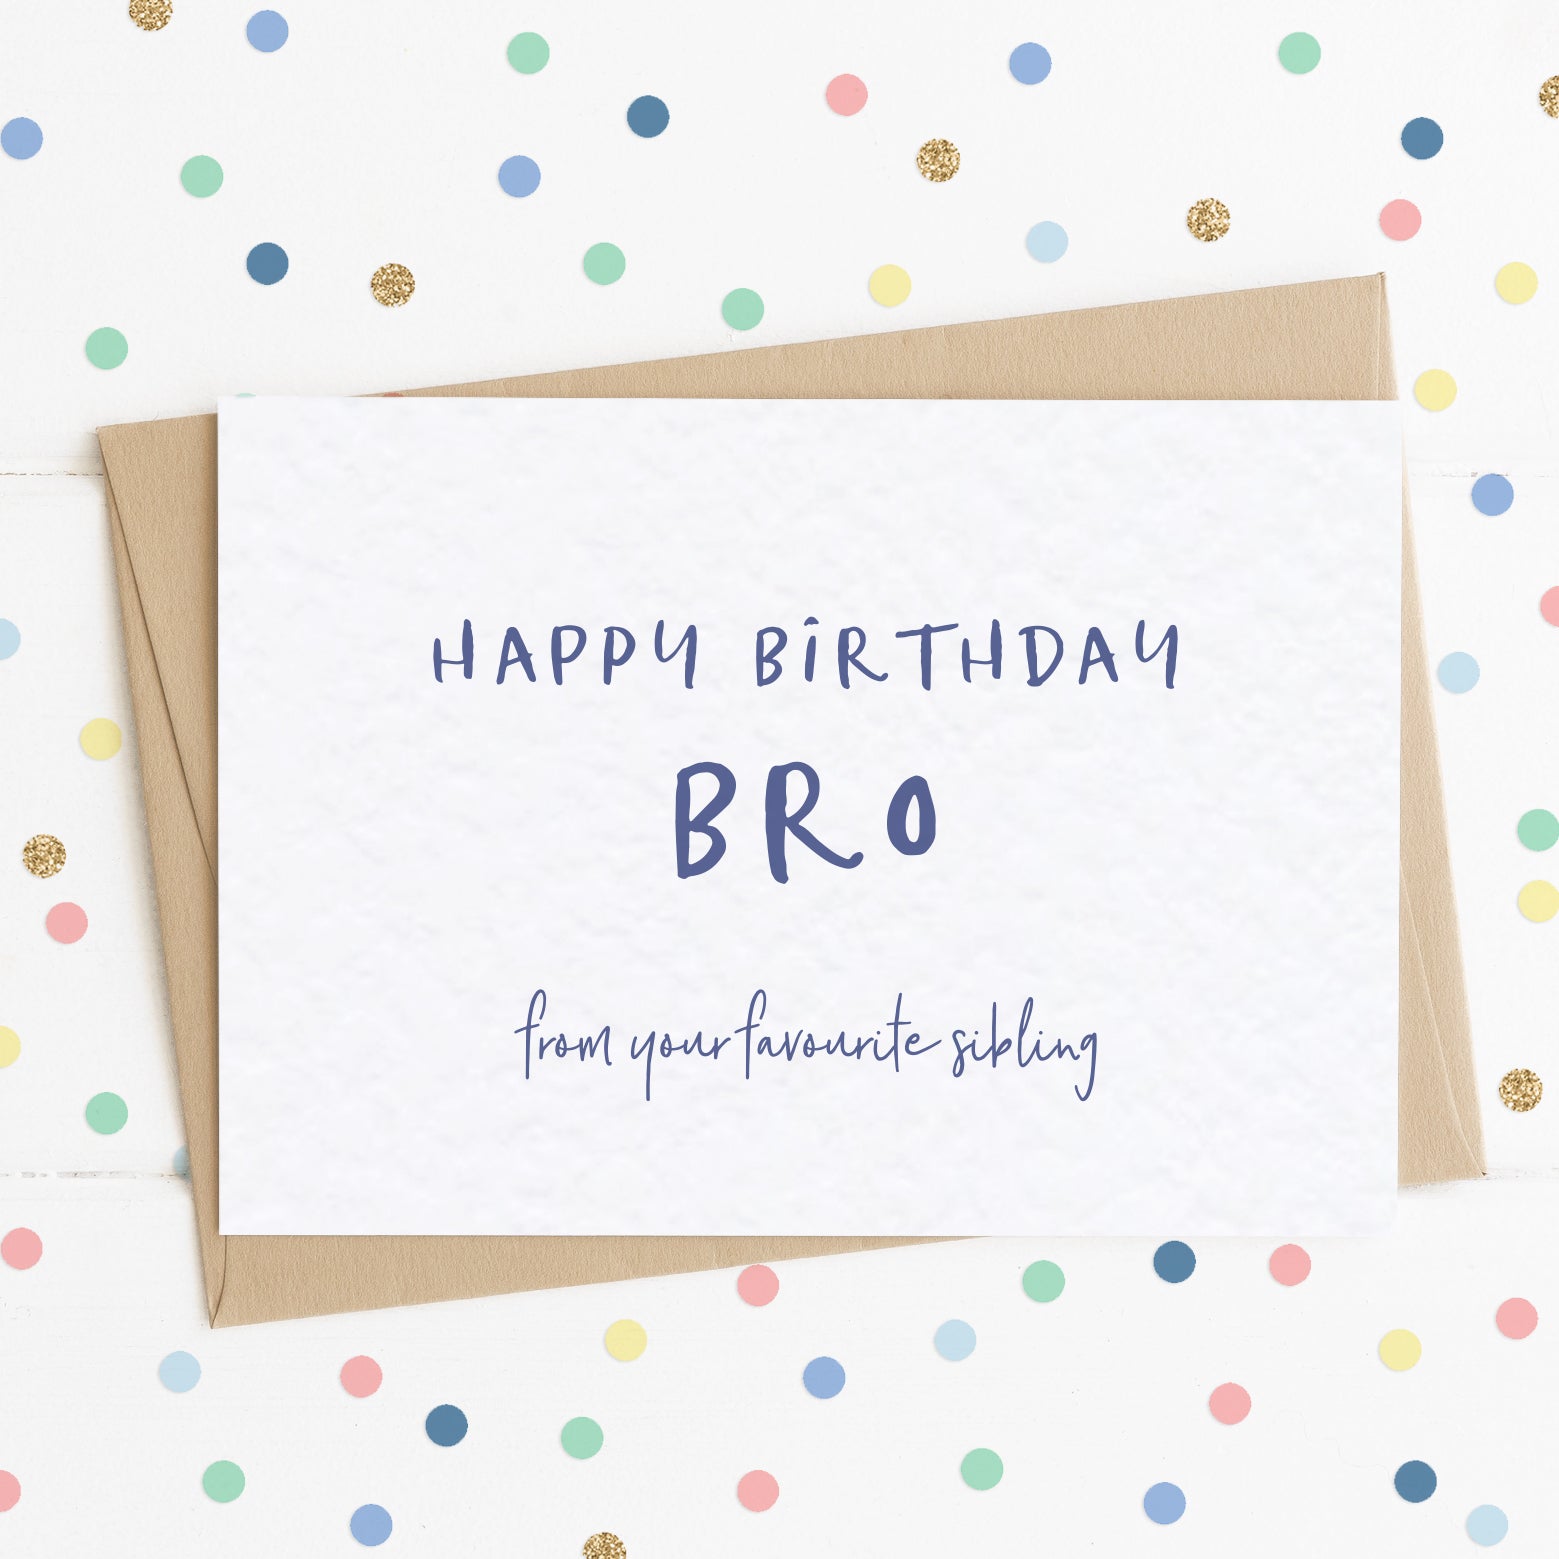 A funny brother birthday card with the message "Happy Birthday Bro - From Your Favourite Sibling".